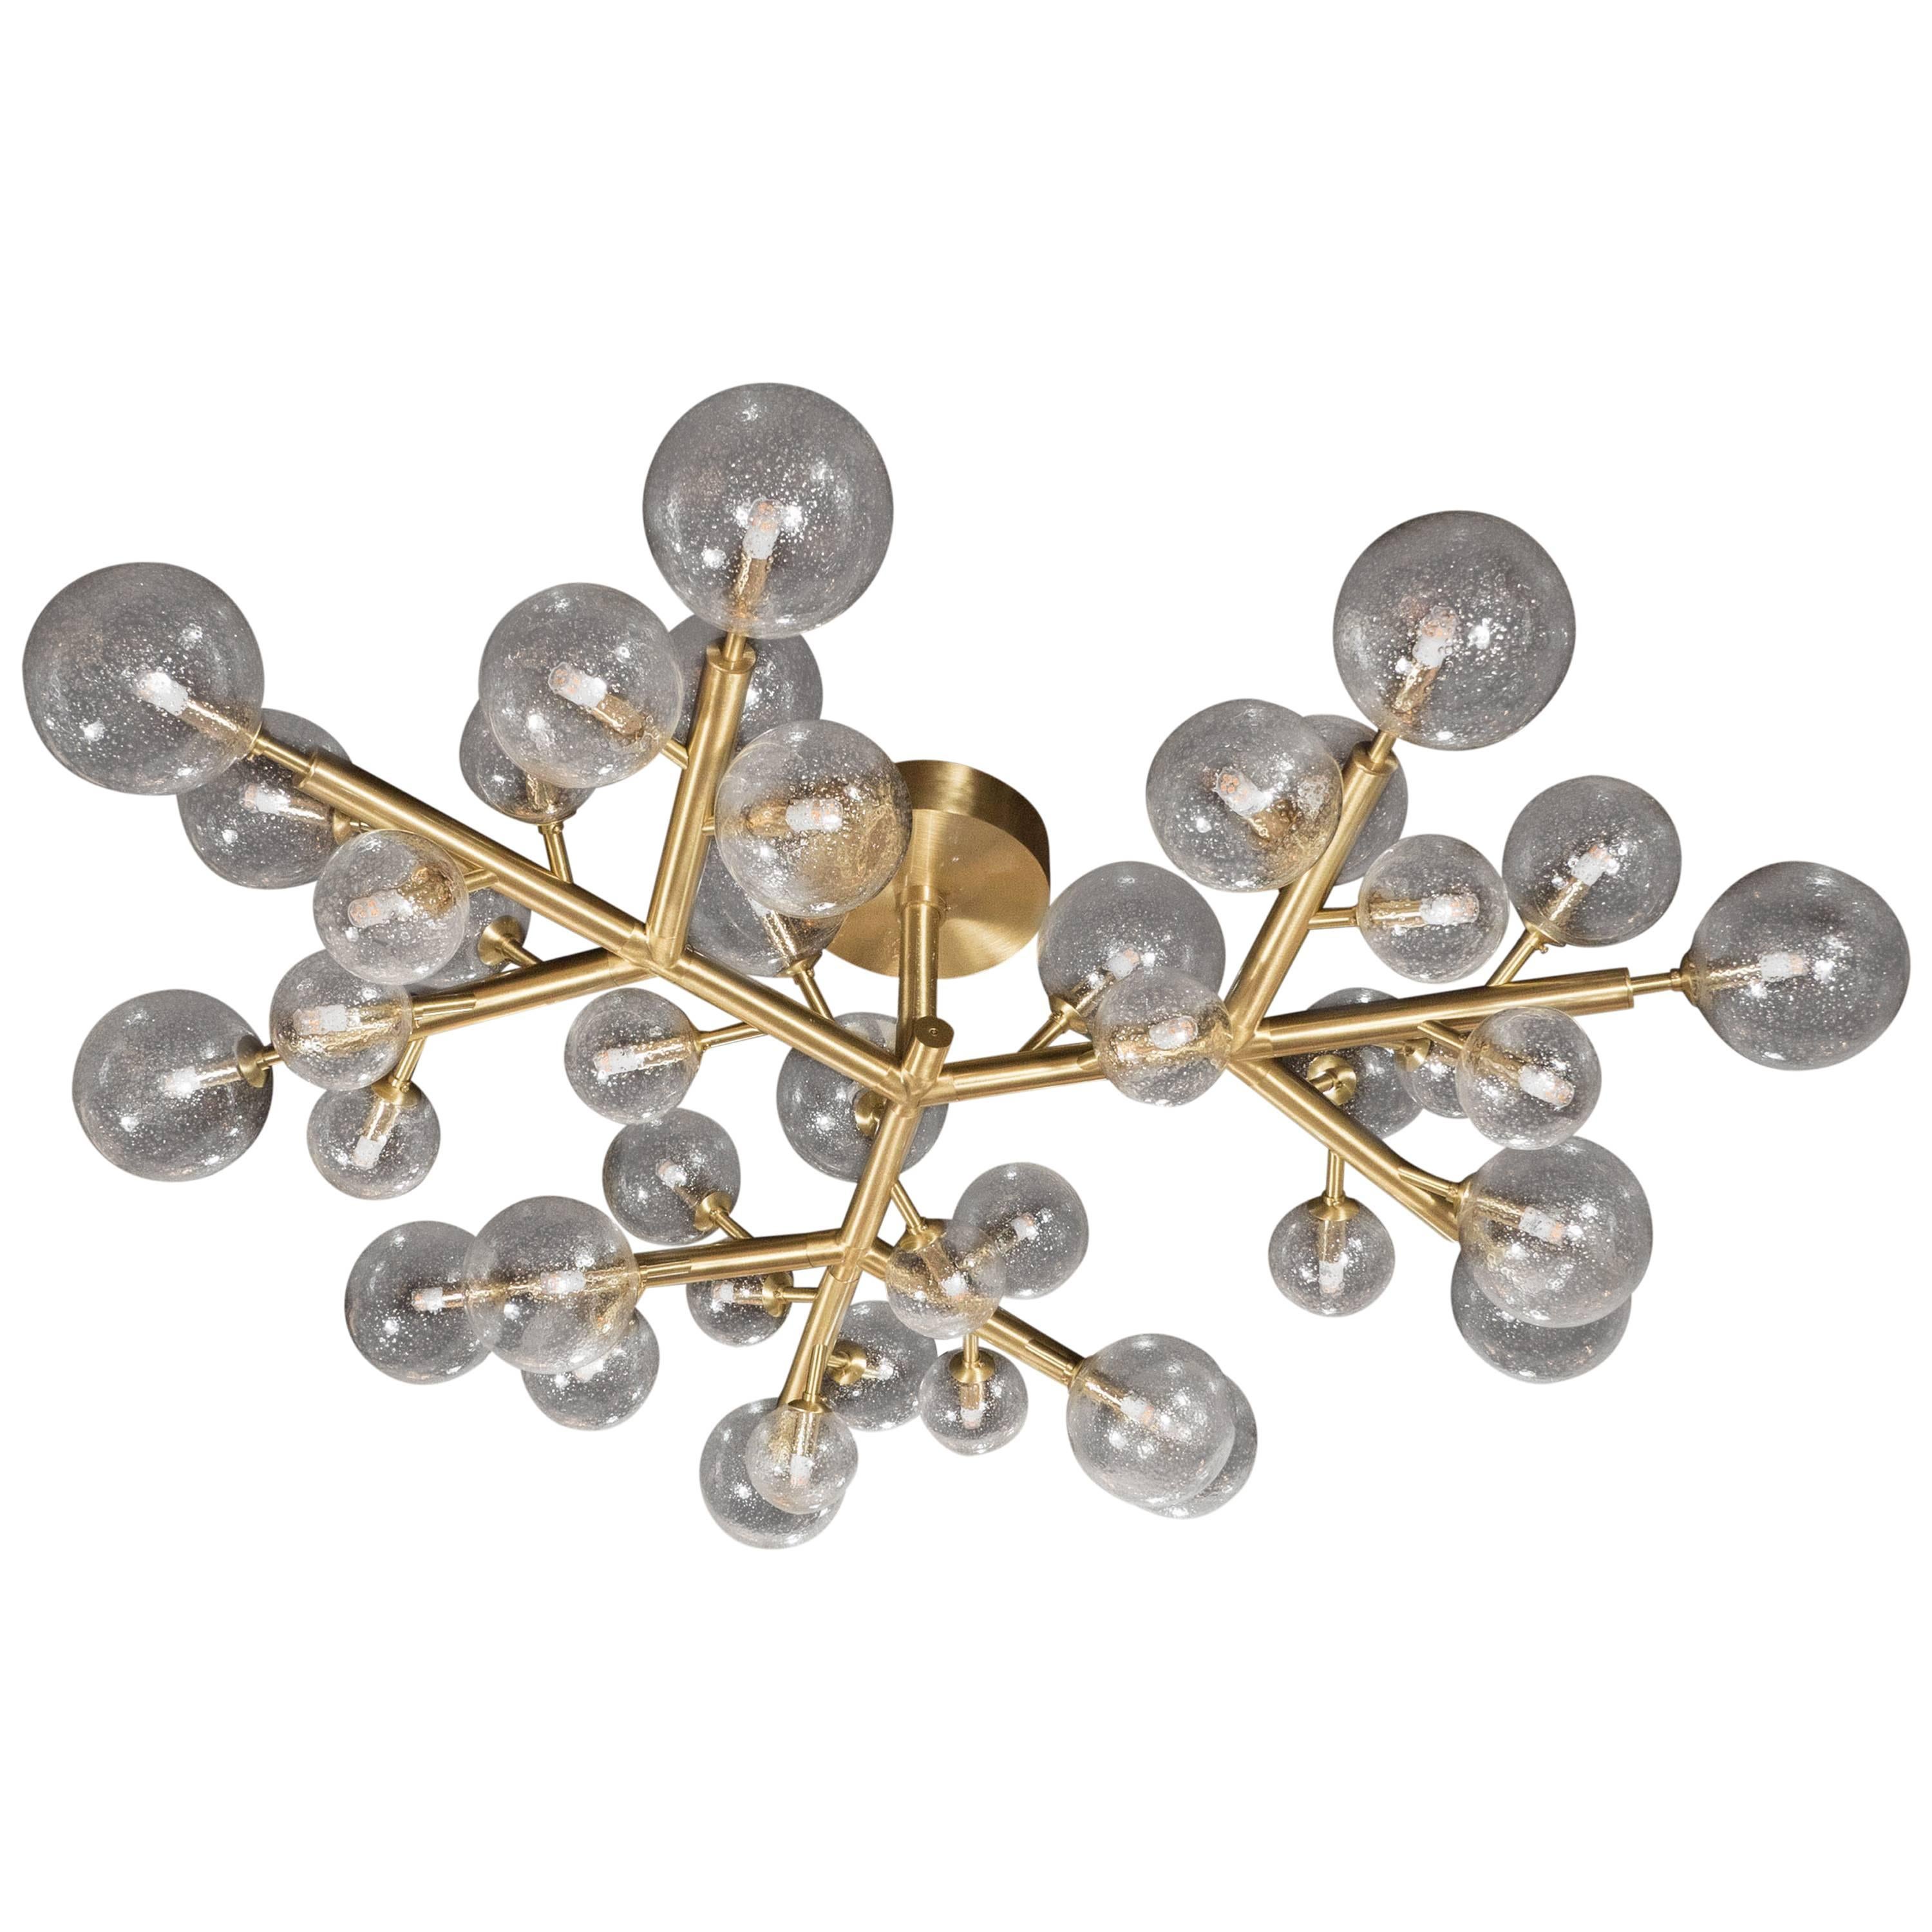 Brass & Murano Glass Molecular "Snowflake" Chandelier by High Style Deco